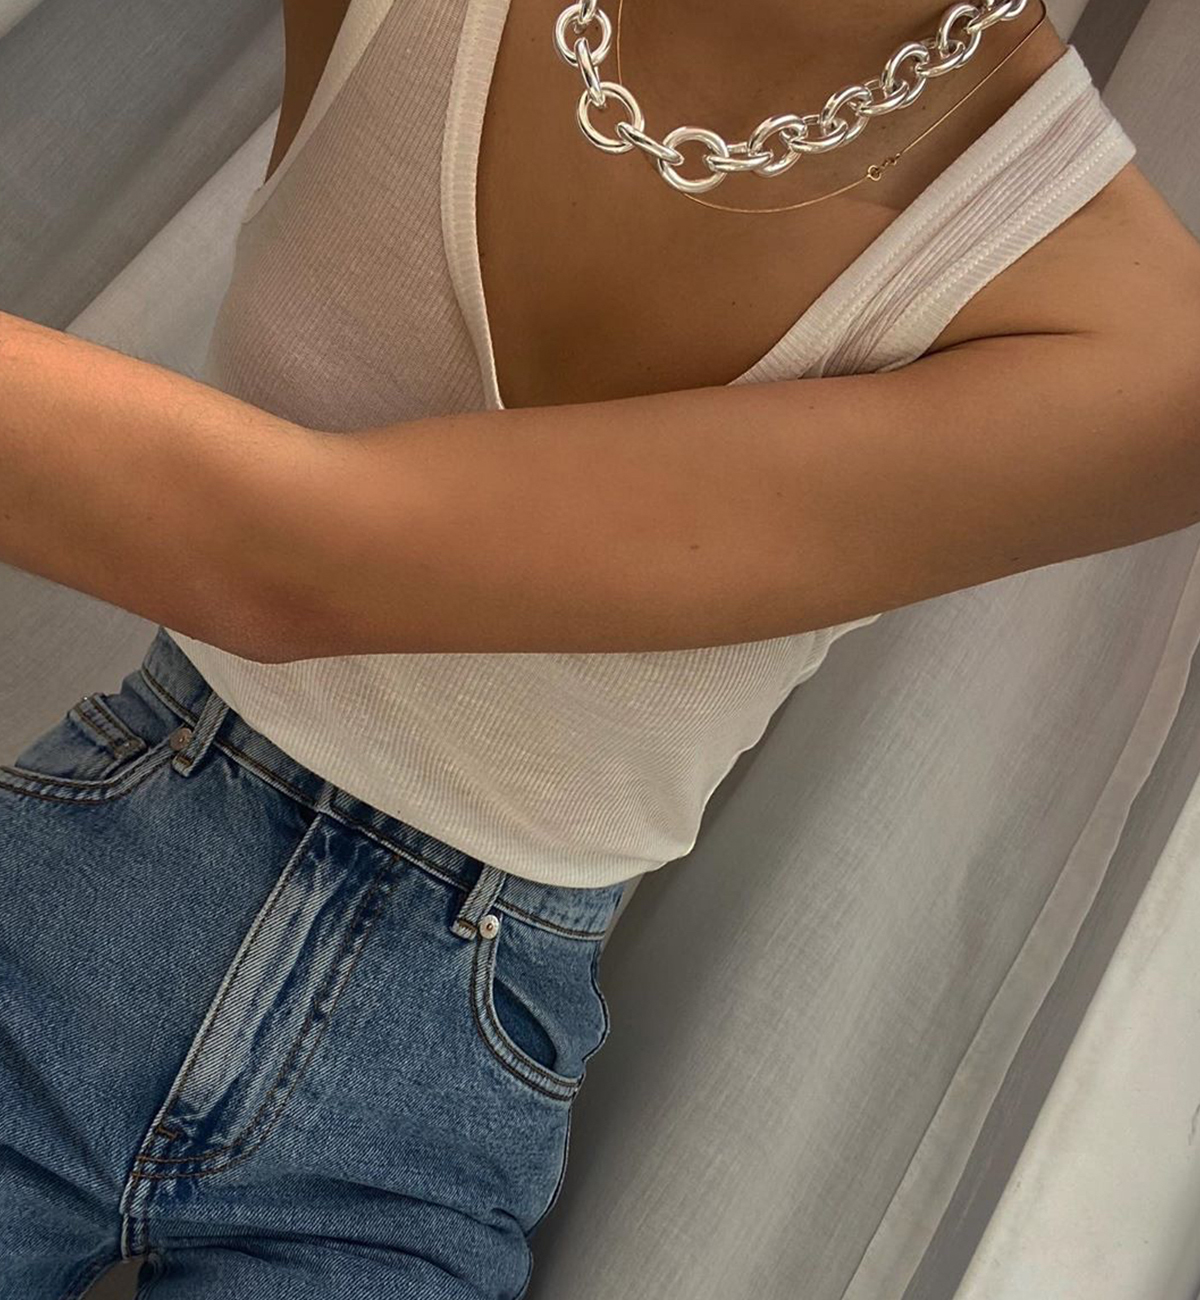 White Tank Silver Necklace Jeans Instagram